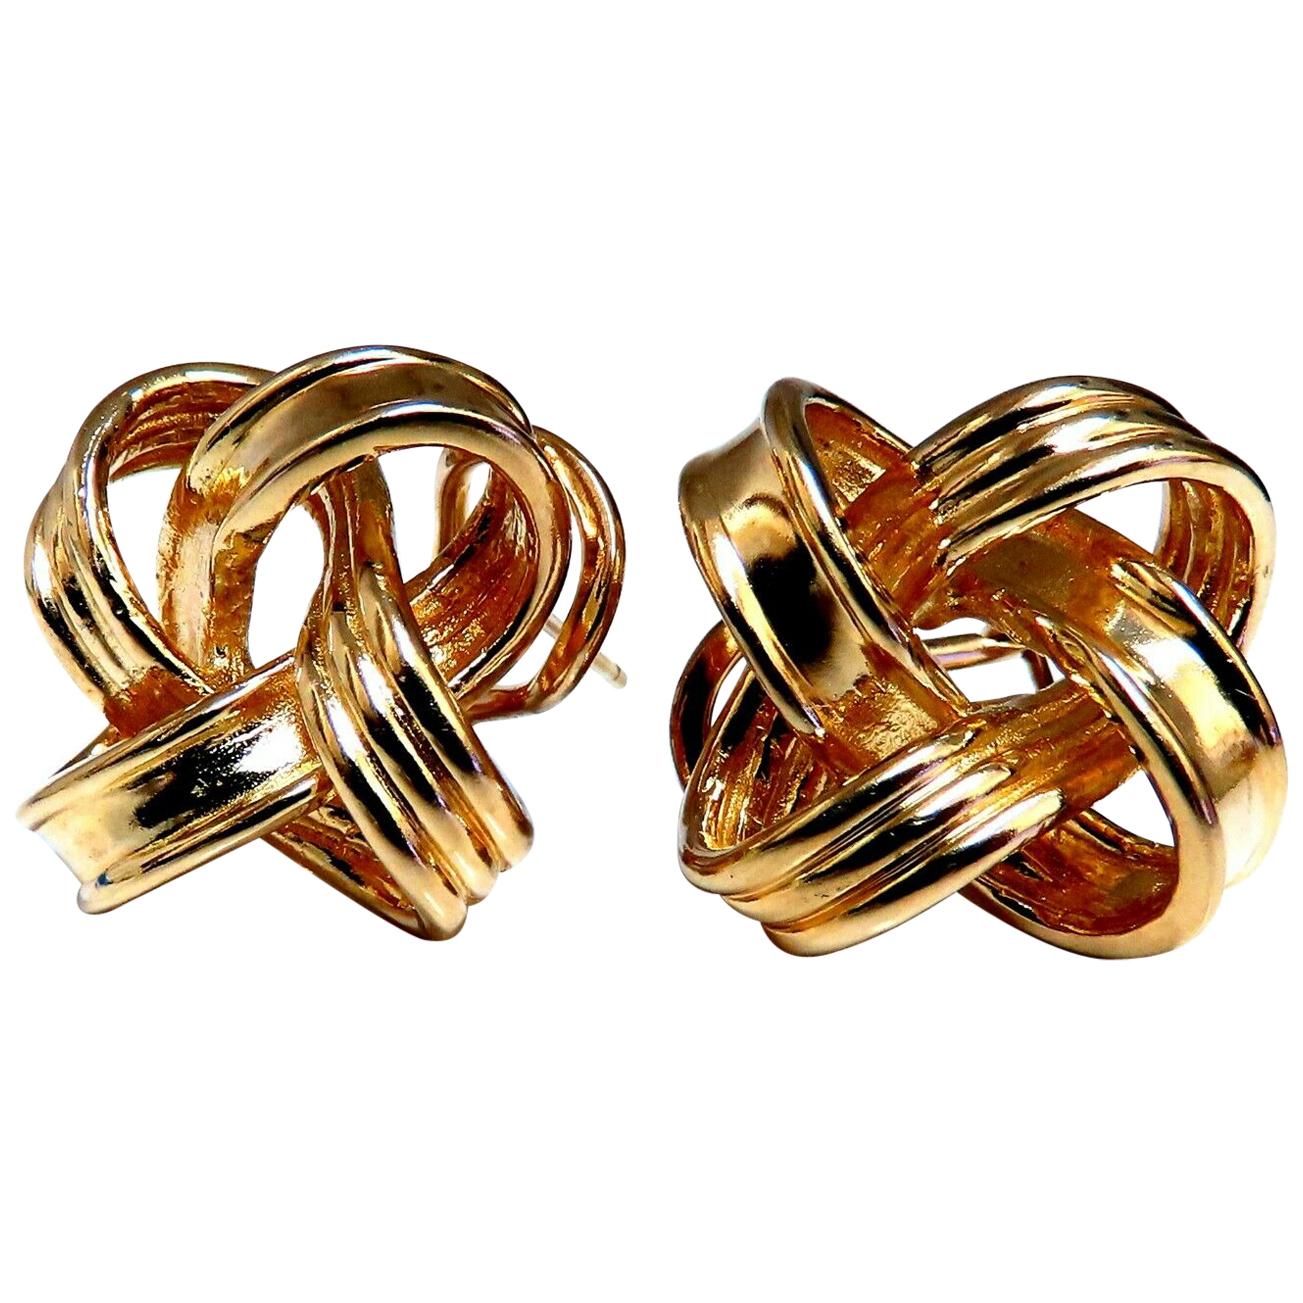 14 Karat Gold Textured Inverted Knot Clip Earrings